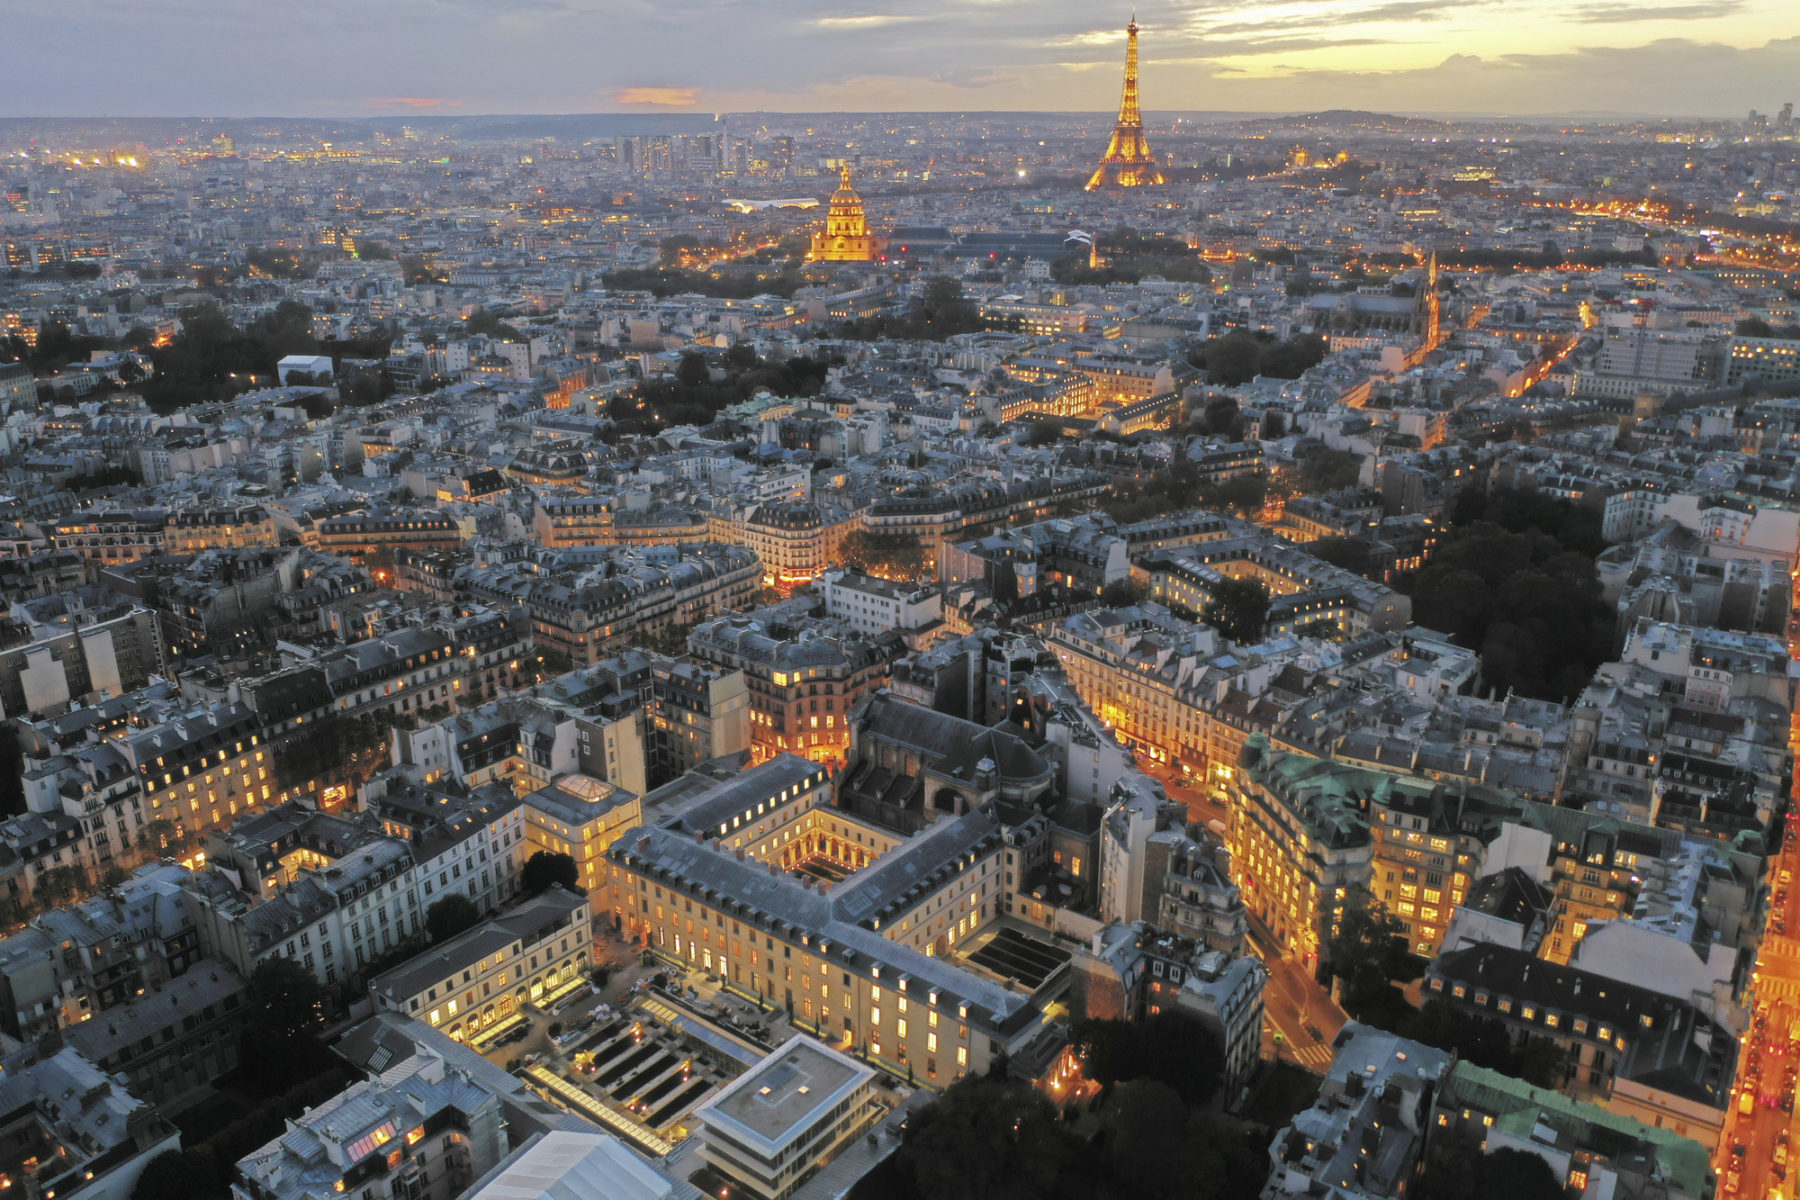 aerial photo of site at dusk, the Eiffel Tower is in the background